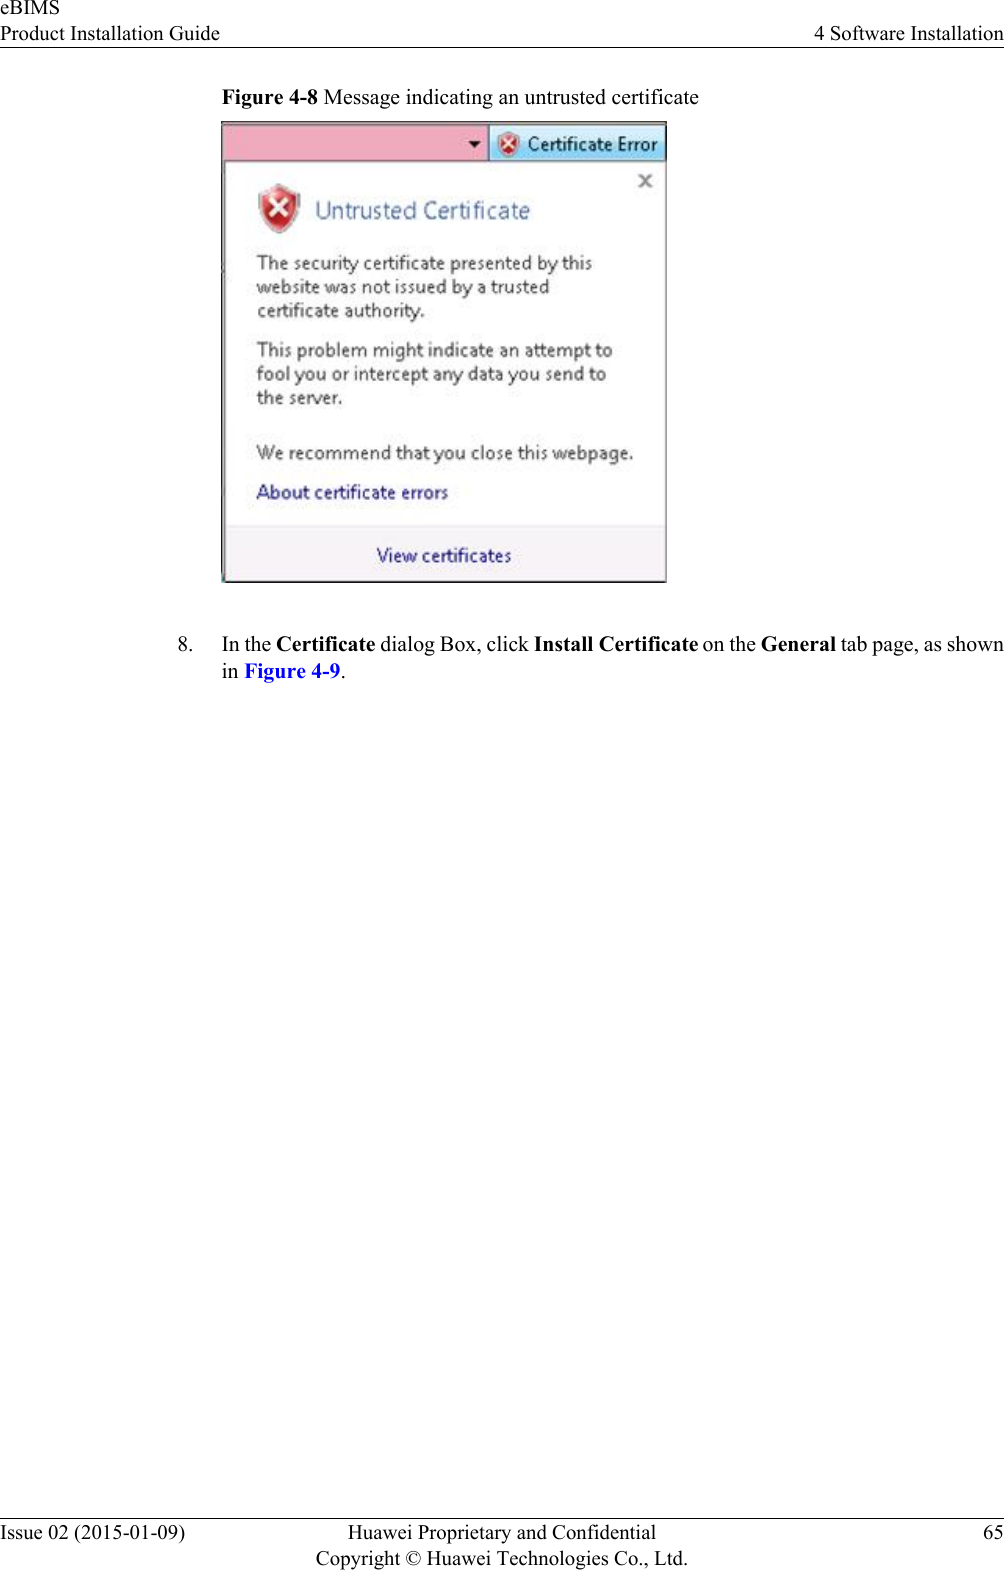 Figure 4-8 Message indicating an untrusted certificate8. In the Certificate dialog Box, click Install Certificate on the General tab page, as shownin Figure 4-9.eBIMSProduct Installation Guide 4 Software InstallationIssue 02 (2015-01-09) Huawei Proprietary and ConfidentialCopyright © Huawei Technologies Co., Ltd.65